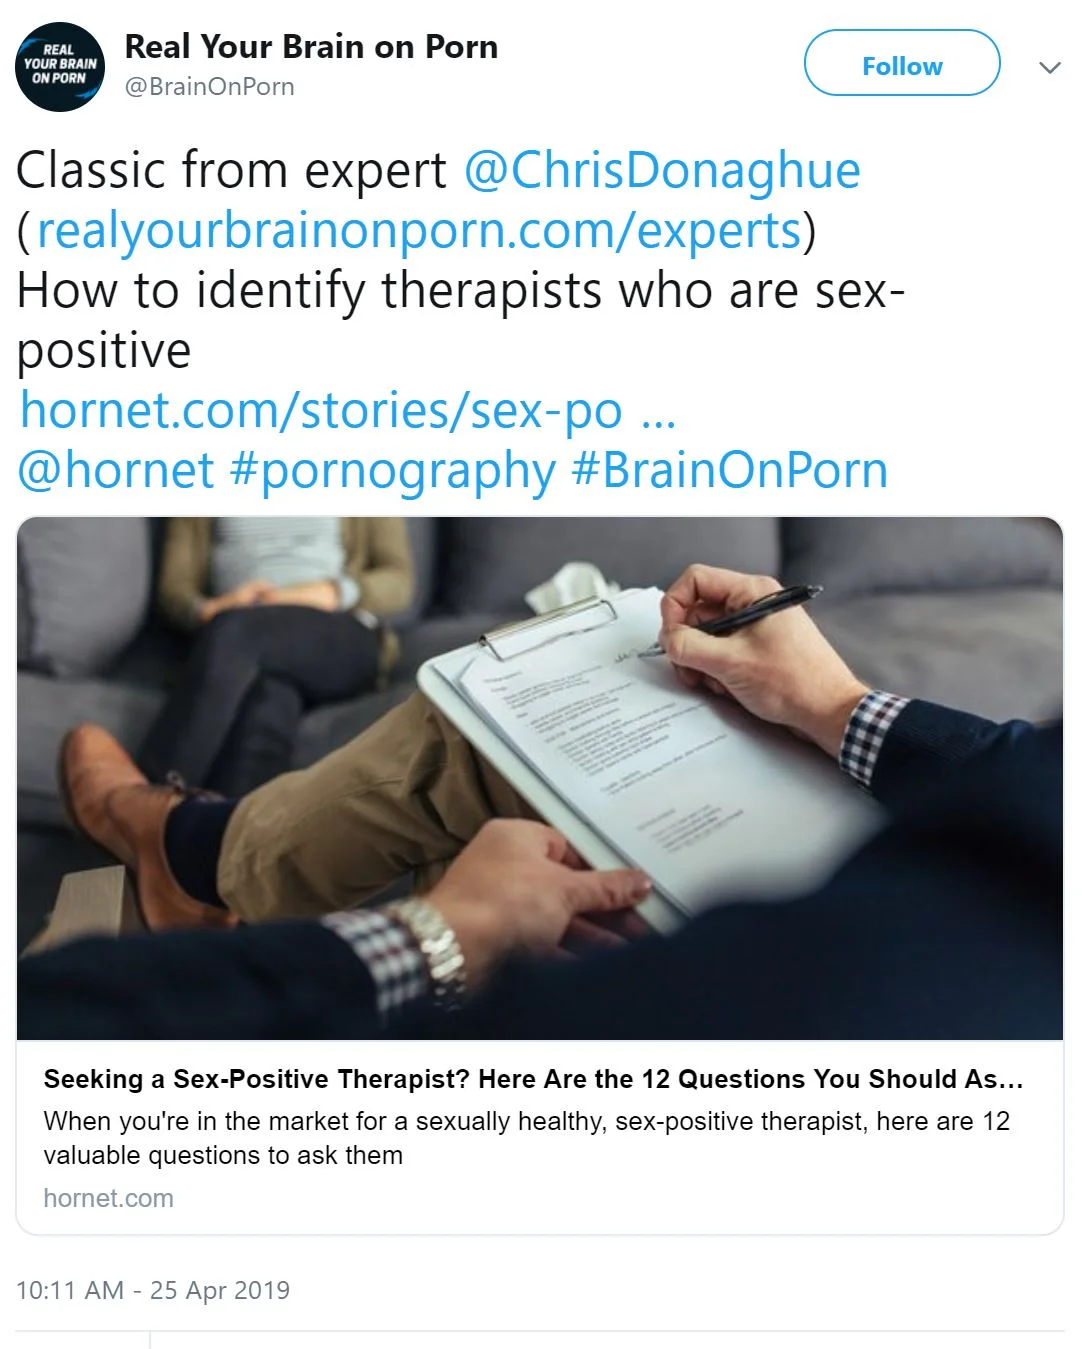 Xxx Ccn - RealYourBrainOnPorn (@BrainOnPorn) tweets: Daniel Burgess, Nicole Prause &  pro-porn allies collaborate on a biased website and social media accounts  to support the porn industry agenda (beginning in April, 2019) - Your Brain